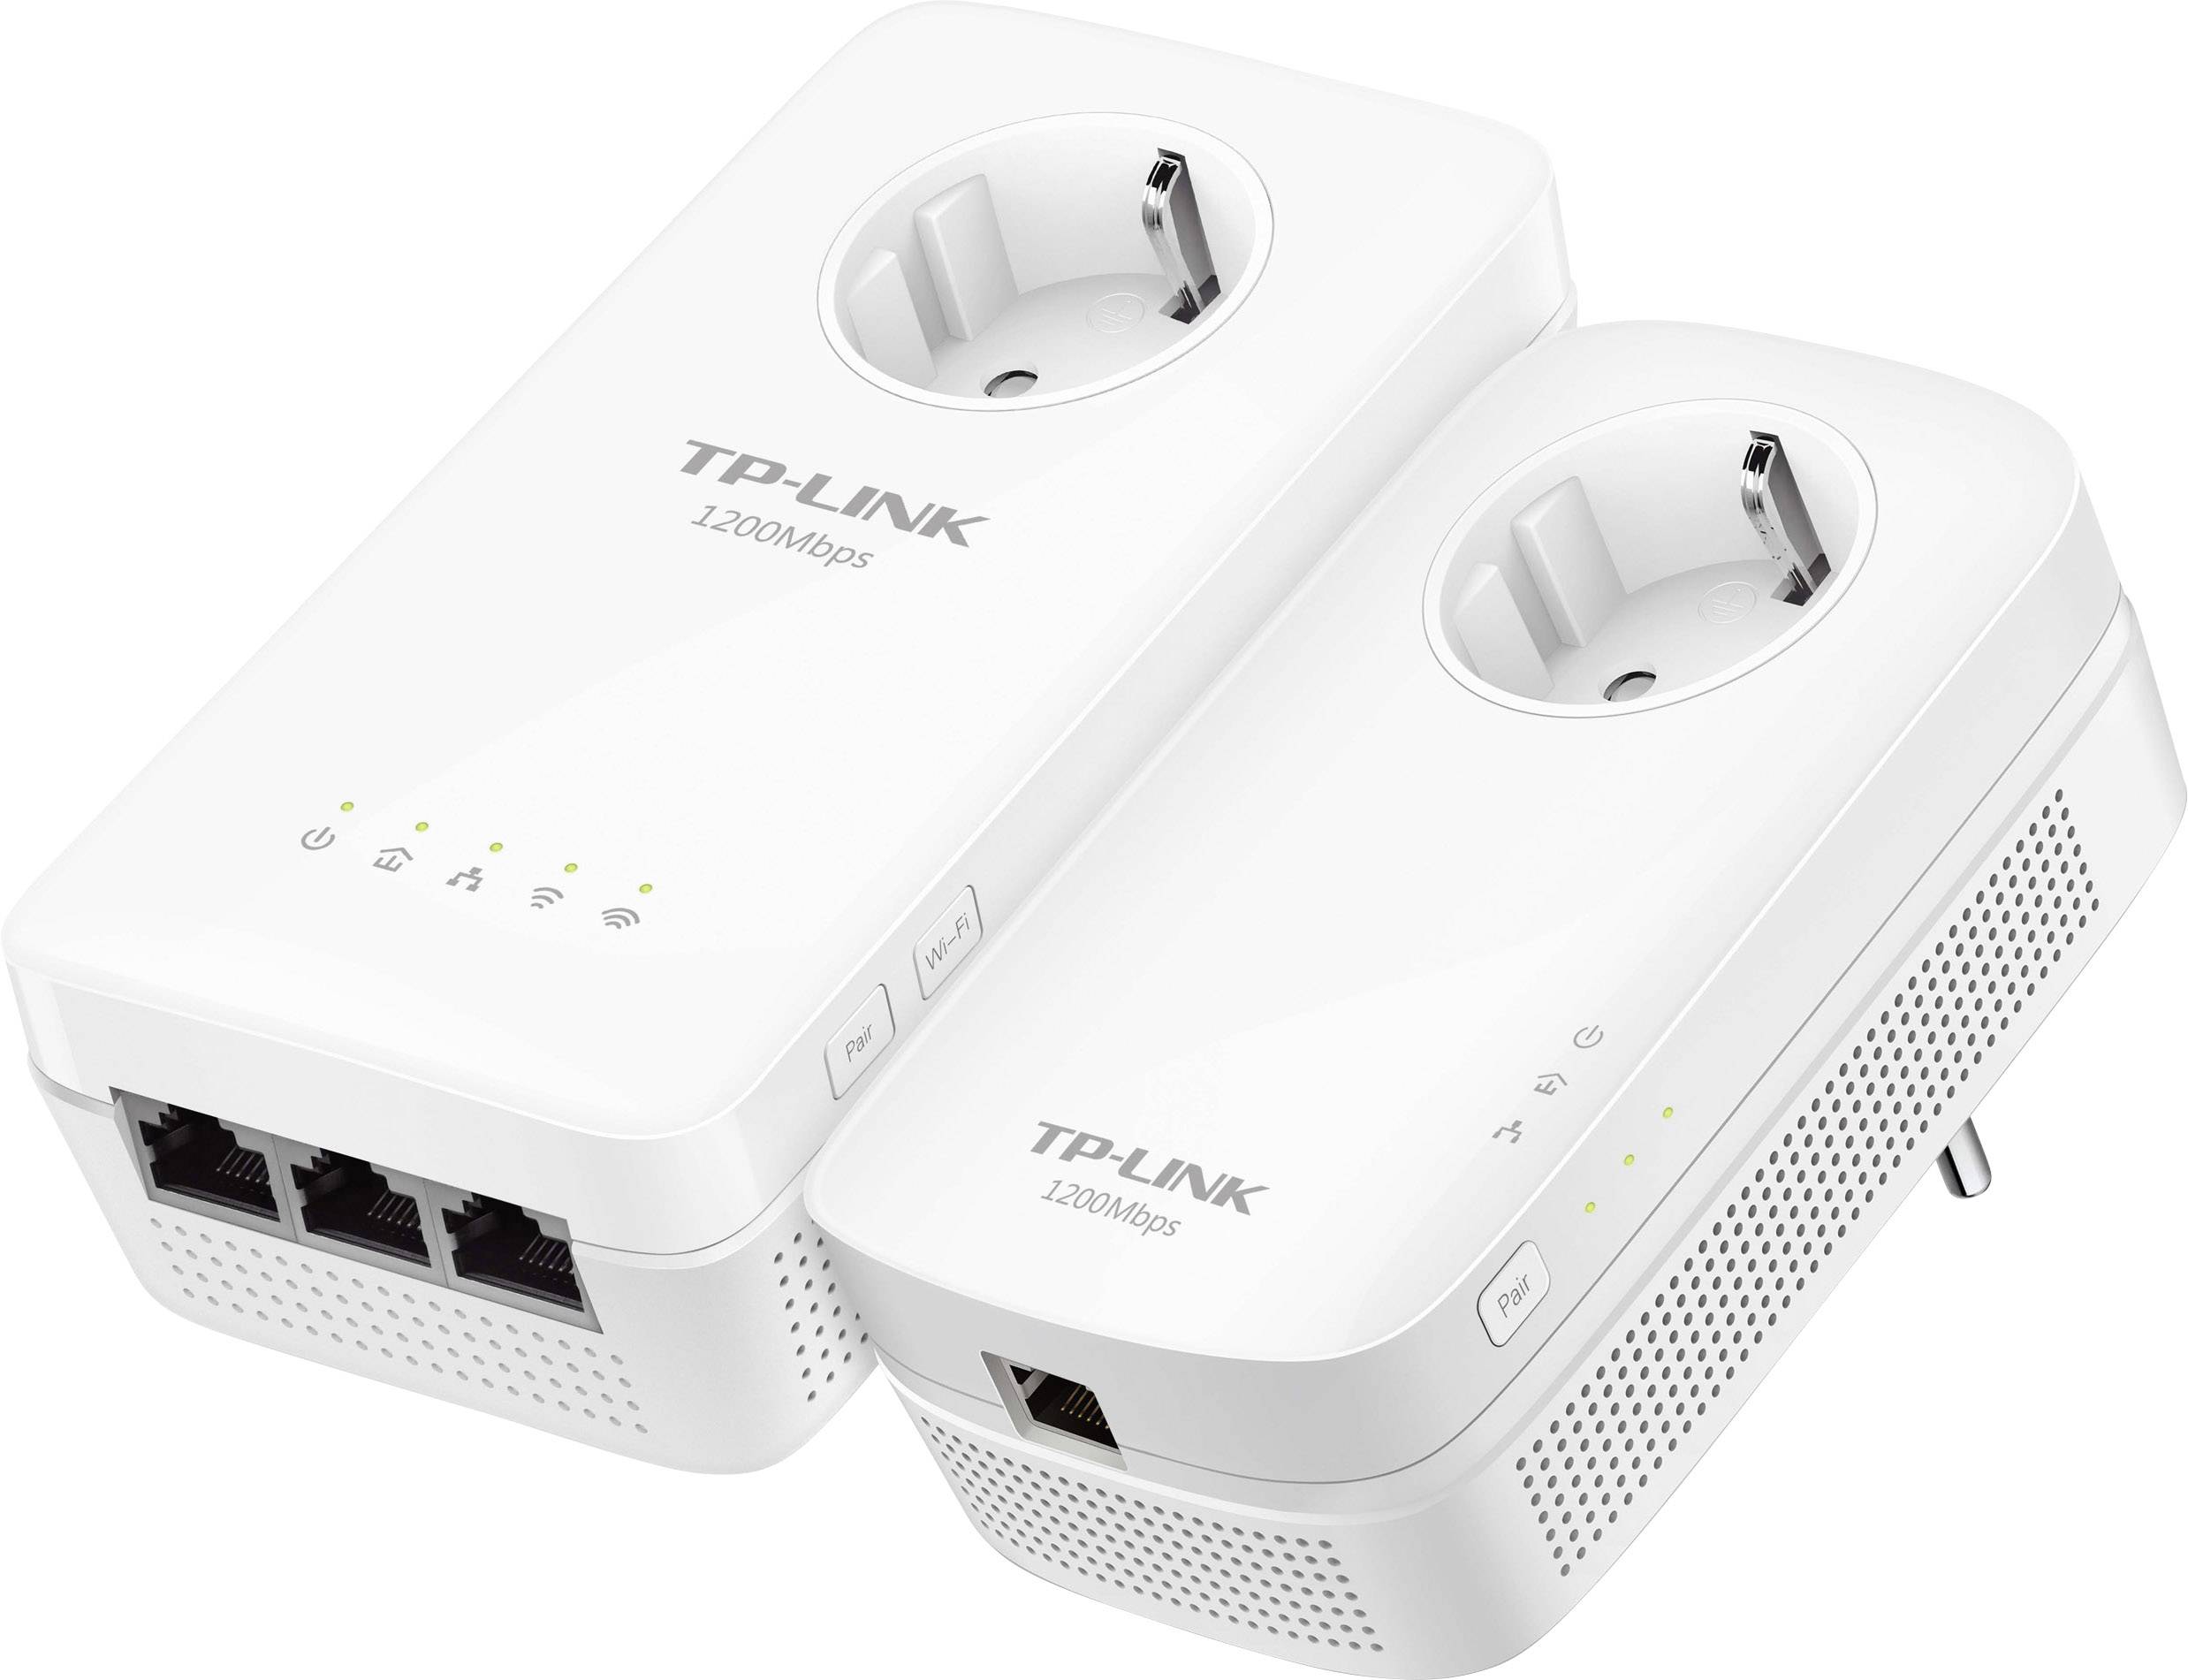 A sampling of networking gear from CES: TP-Link goes Wi-Fi 6, D